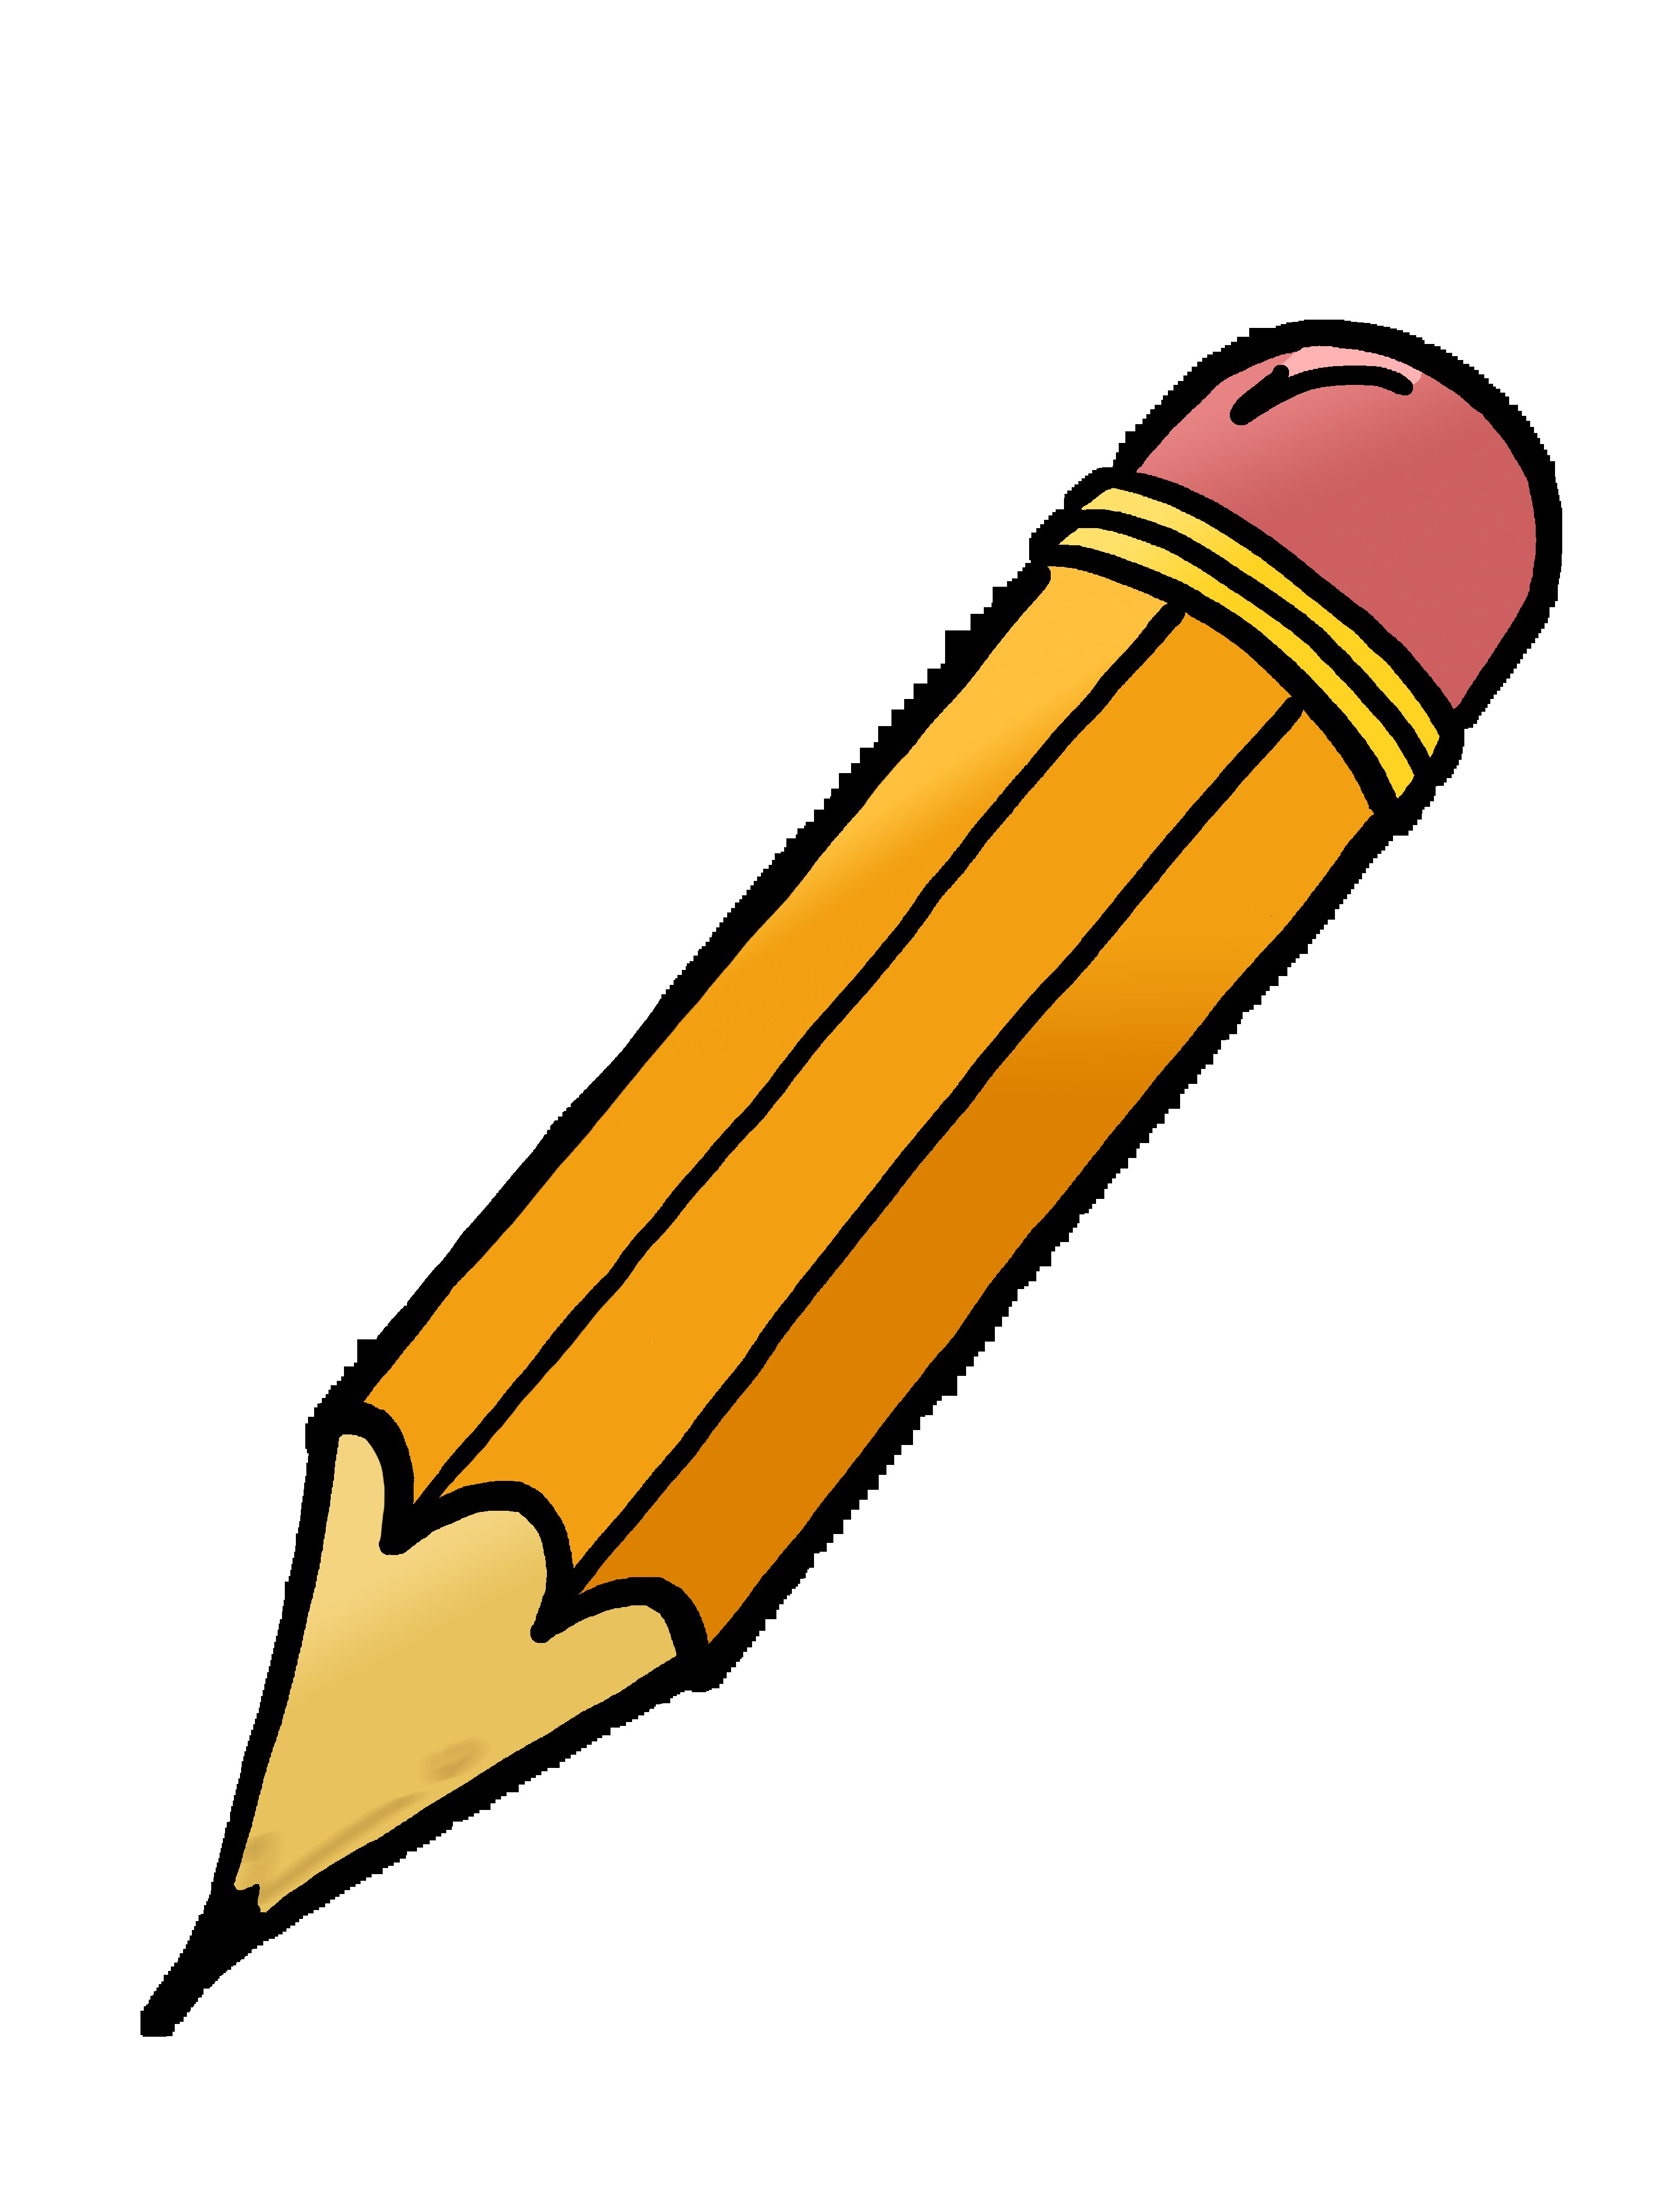 Horizontal Pencil Clip Art | Clipart library - Free Clipart Images